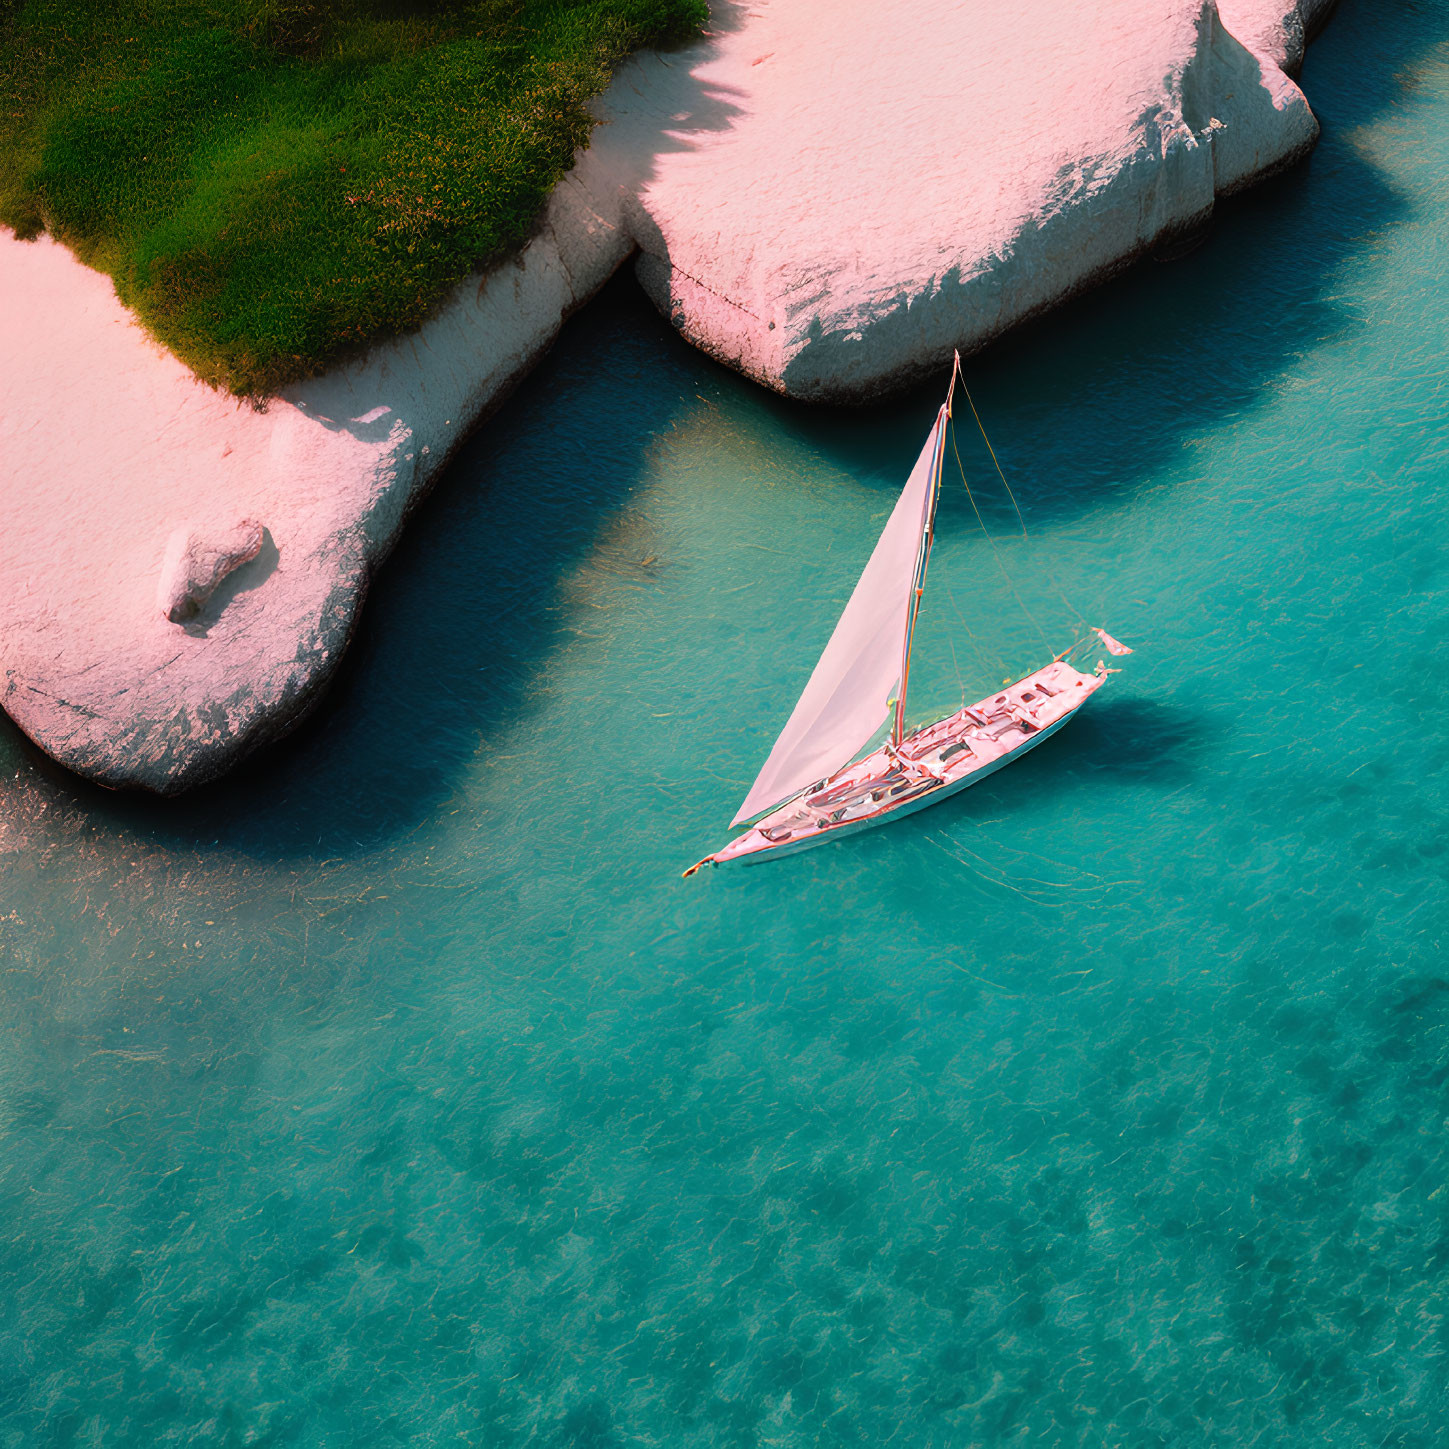 White sail sailboat navigating turquoise waters near pink shores with greenery